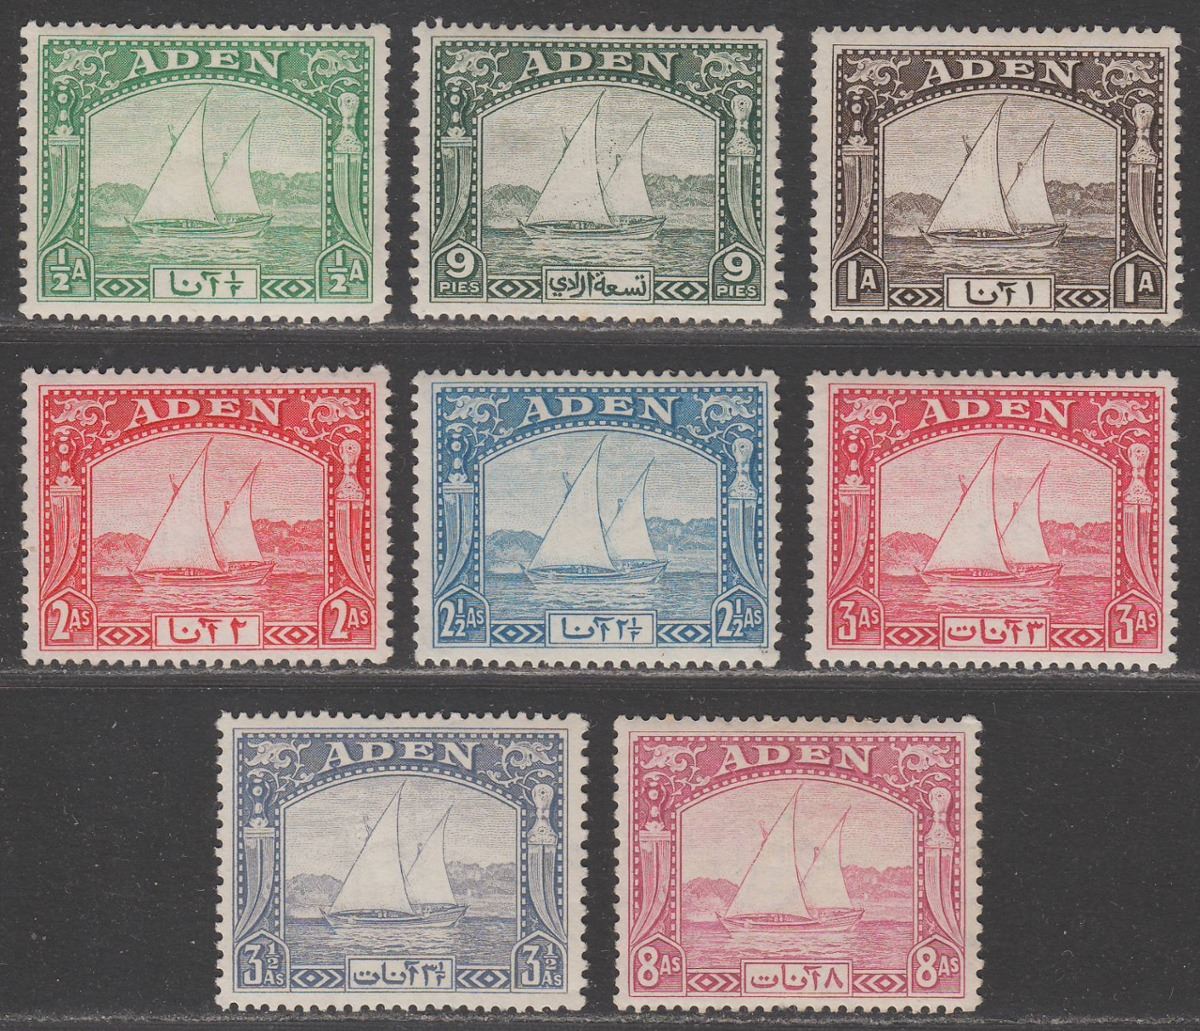 Aden 1937 KGVI Dhow Short Set to 8a Mint SG1-8 cat £70